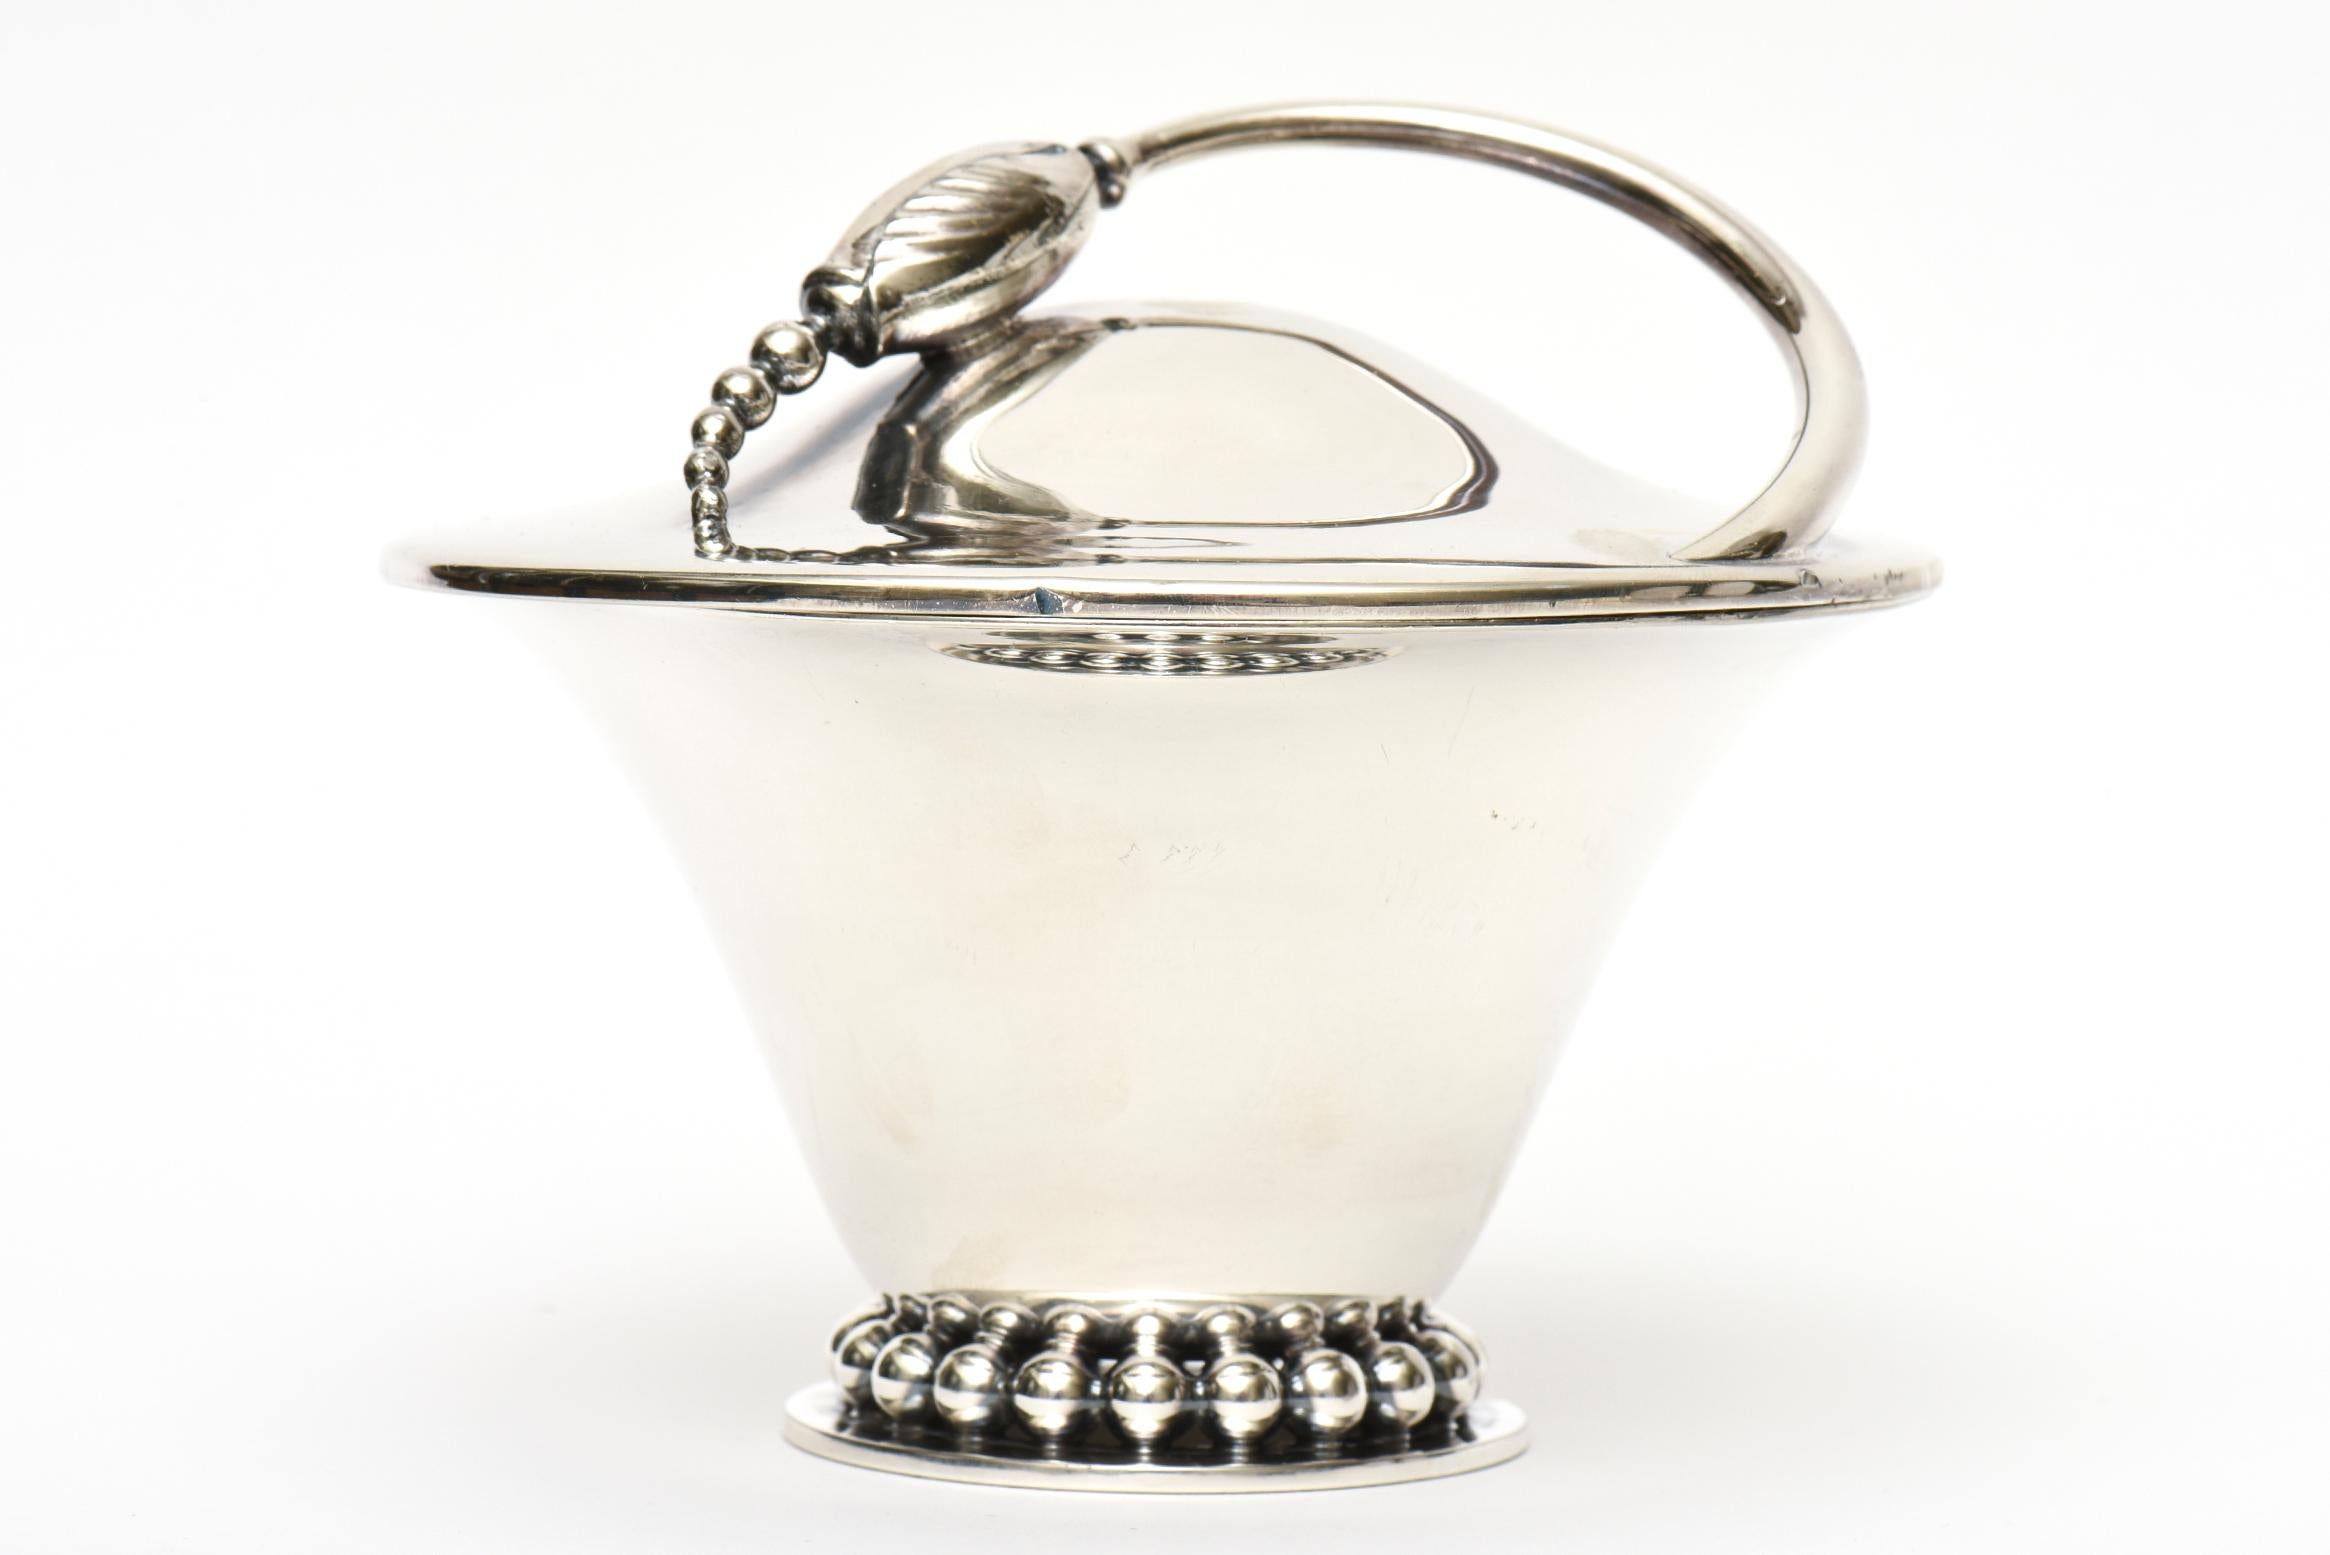 This lovely vintage 1960's covered vessel, bowl and or serving piece is silver-plate. It has a base of beaded balls and the lid is a flower pod design with a swirled stem. This is both in the style of Napier and Georg Jensen from Denmark.  It is